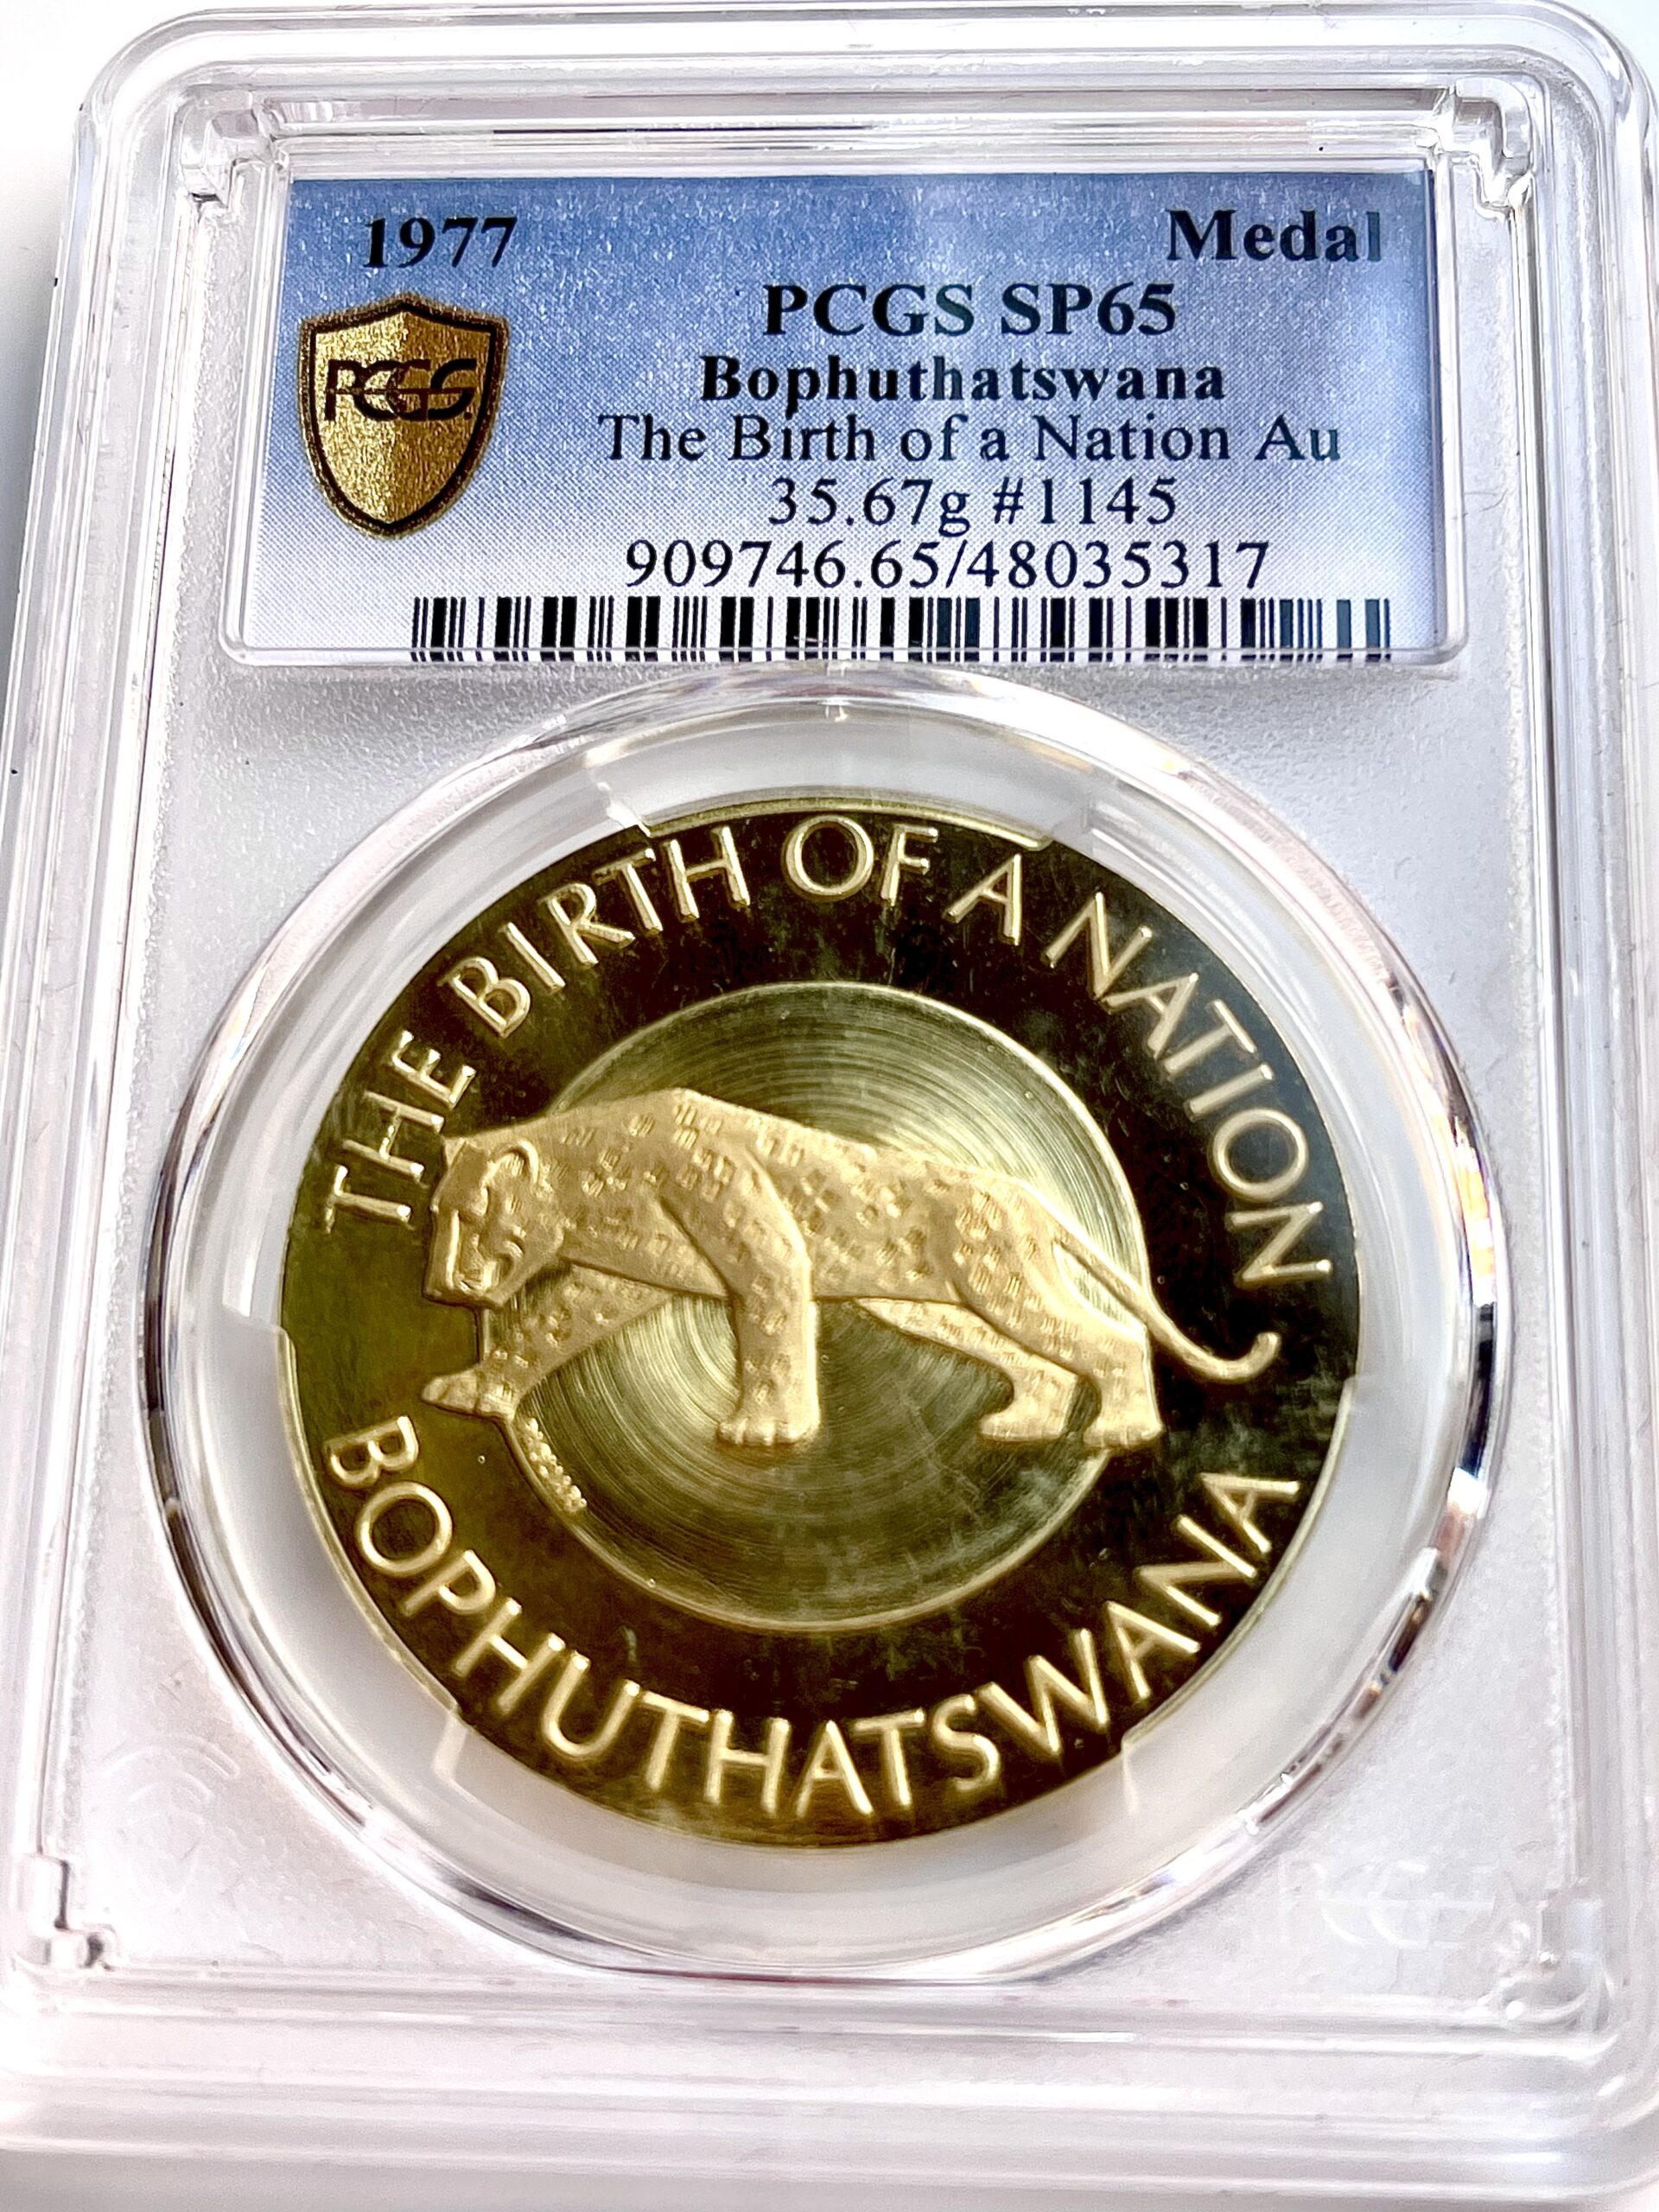 Bophuthatswana 1977 the birth of a nation-Gold Medaillon PCGS SP65